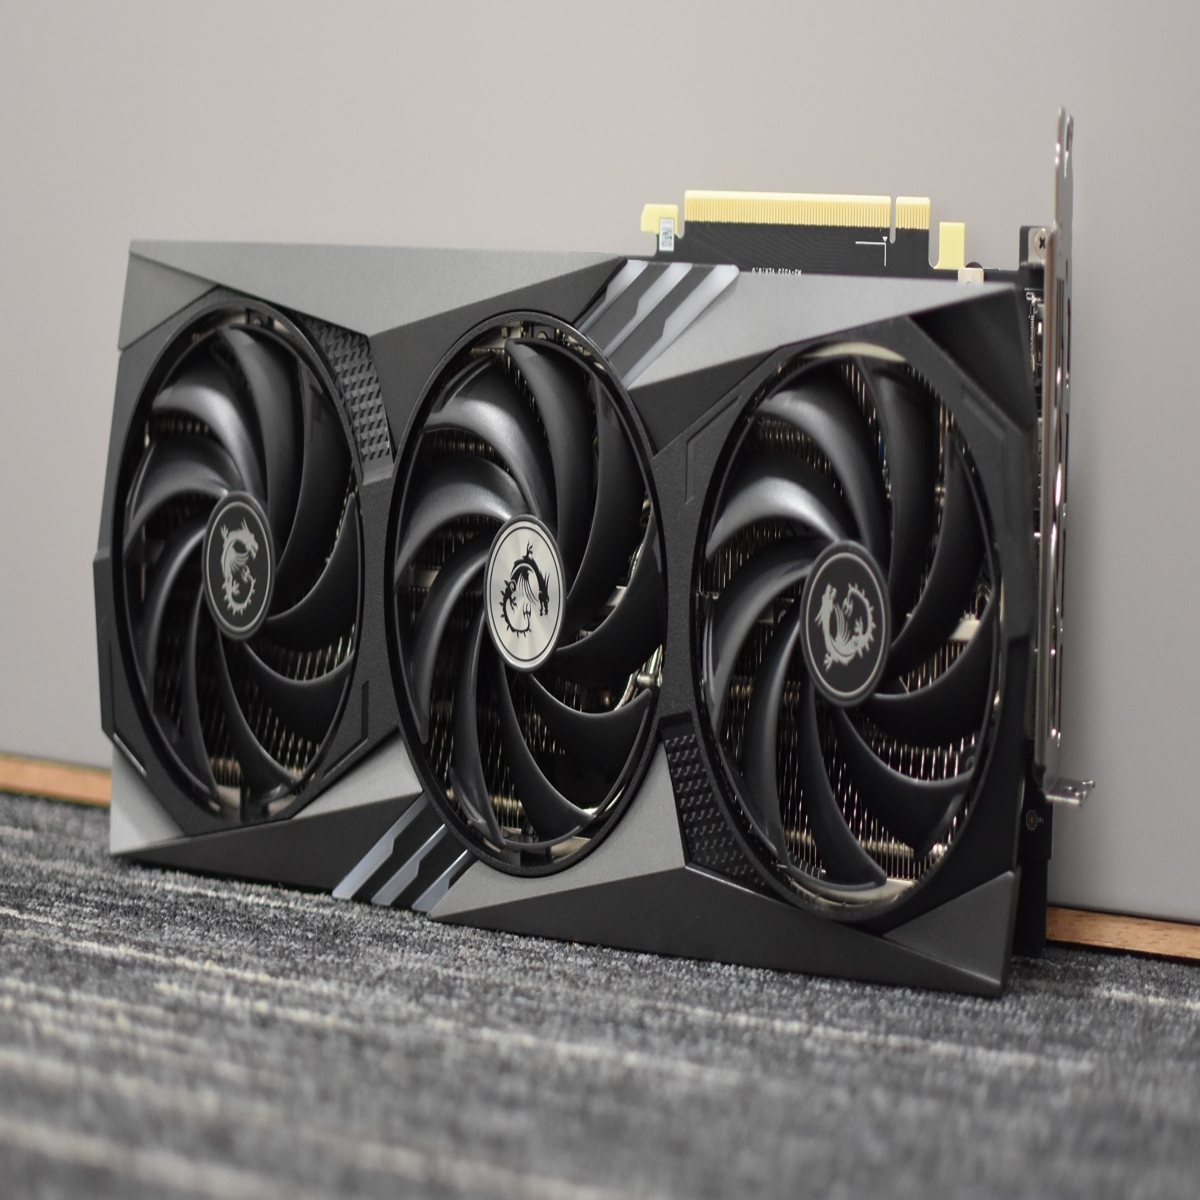 Nvidia GeForce RTX 4070 Super Founders Edition review: A true